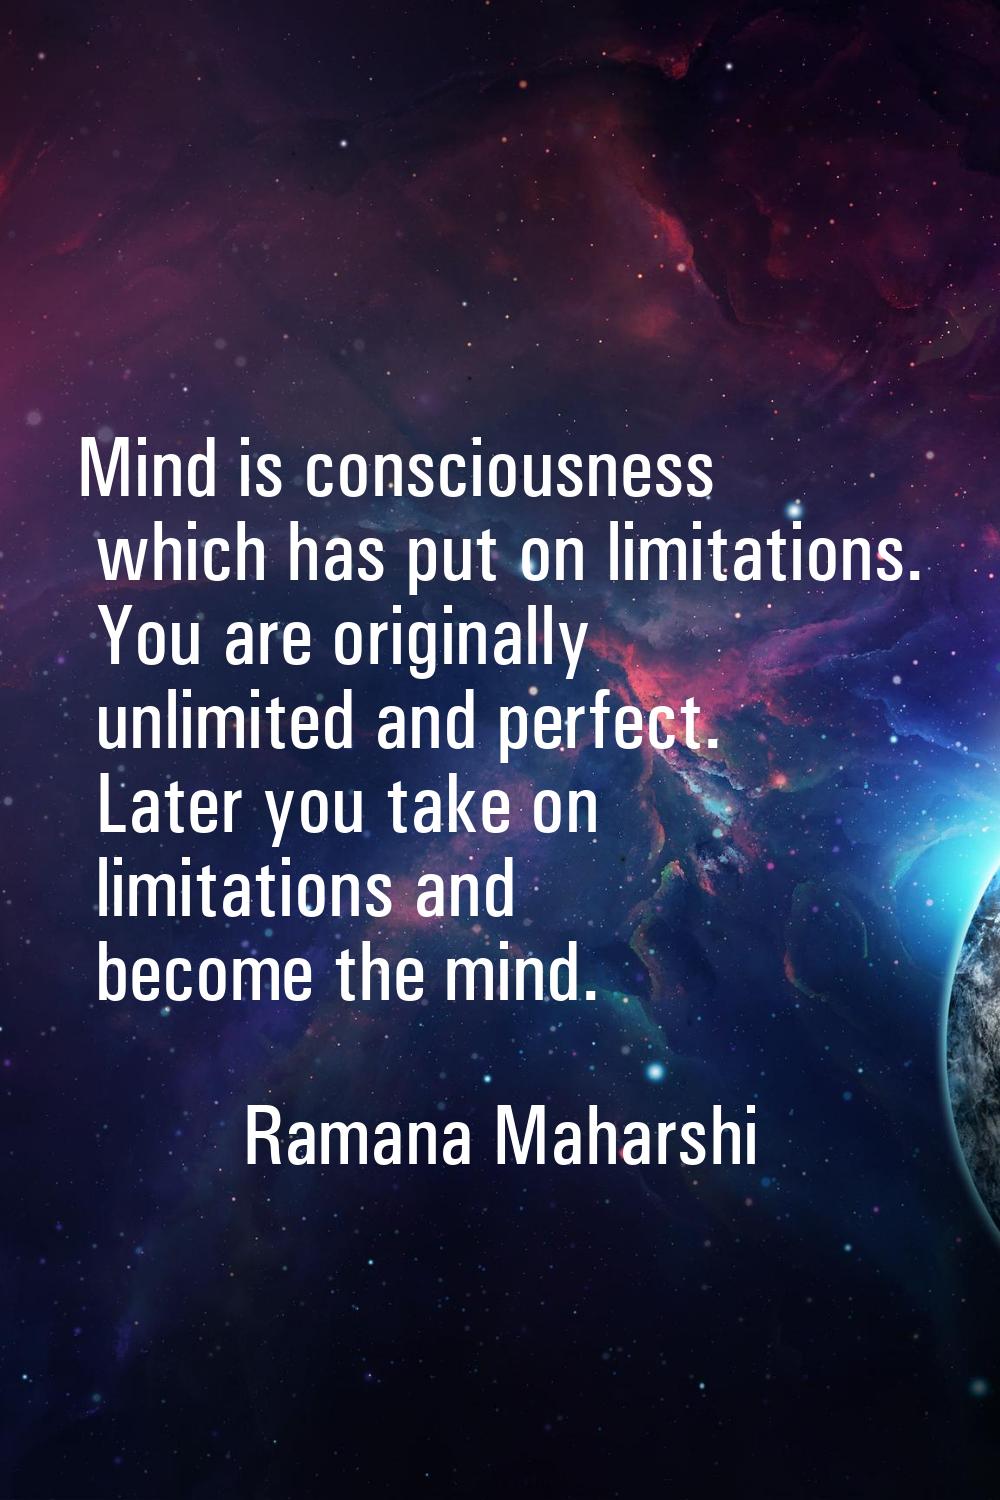 Mind is consciousness which has put on limitations. You are originally unlimited and perfect. Later